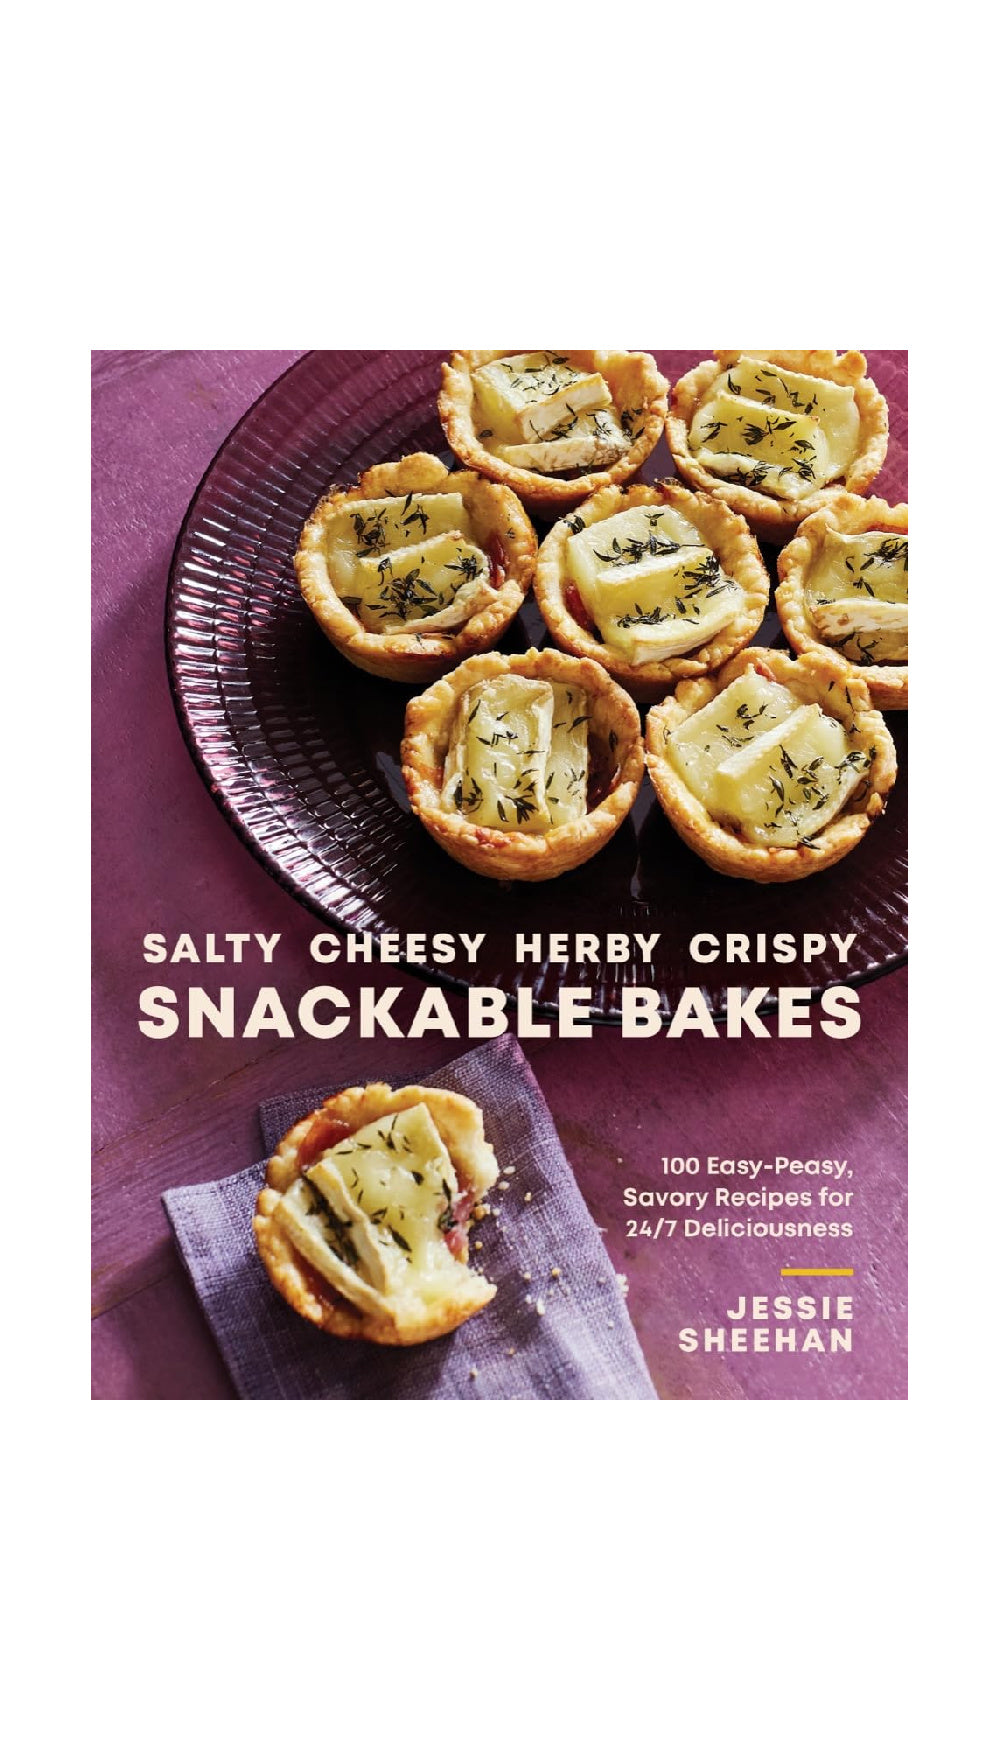 Salty, Cheesy, Herby, Crispy Snackable Bakes / COMING SEPT. 24TH!